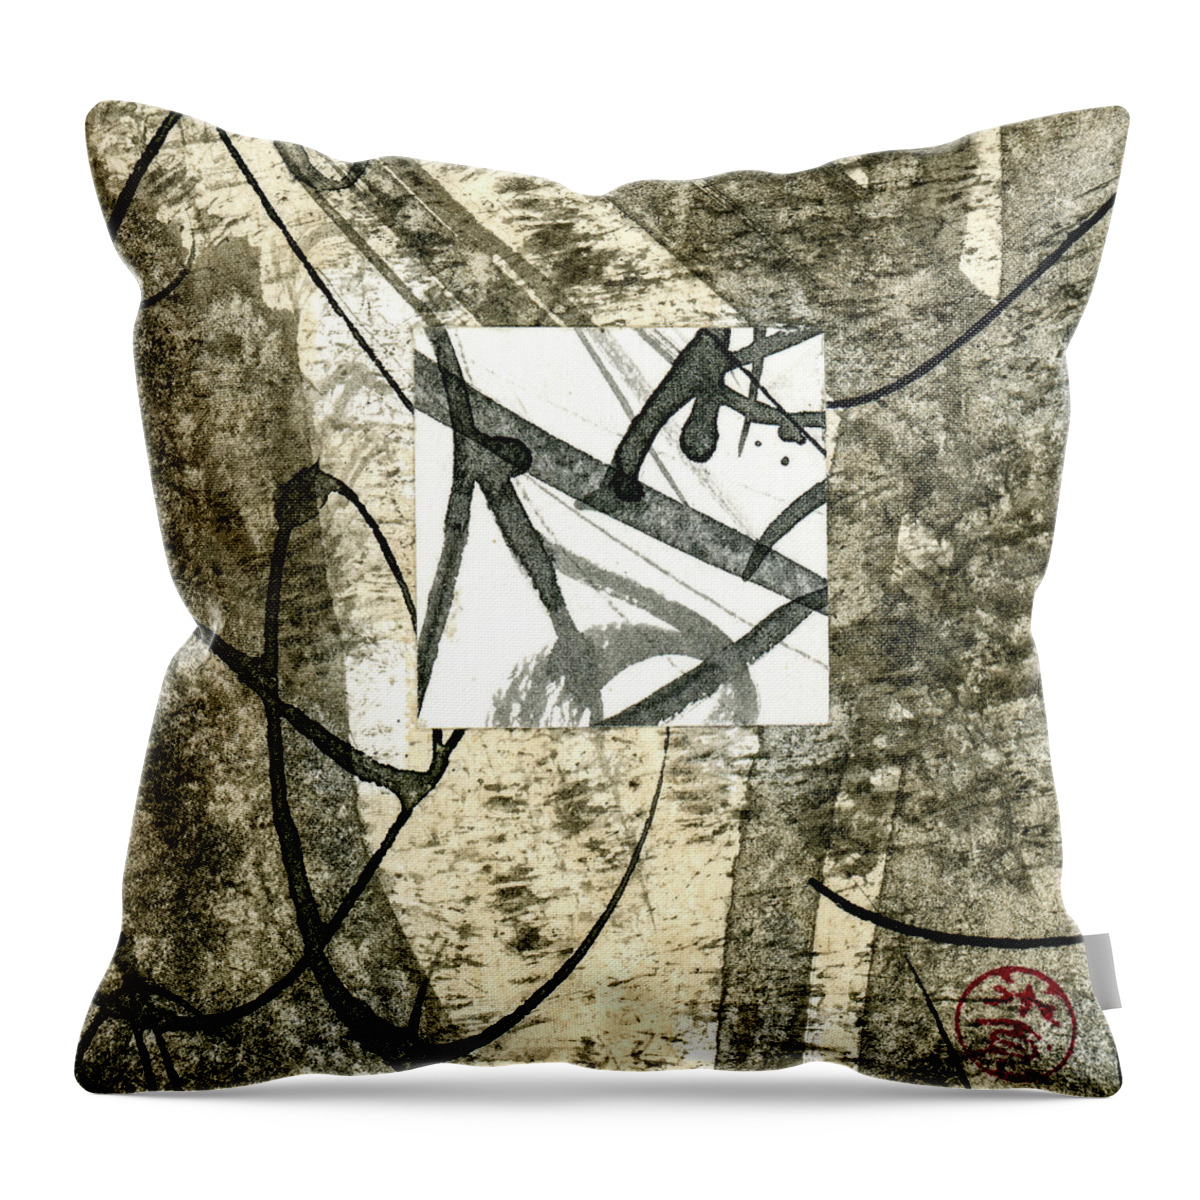 Carol Leigh Throw Pillow featuring the mixed media Small Tag Number 889 by Carol Leigh